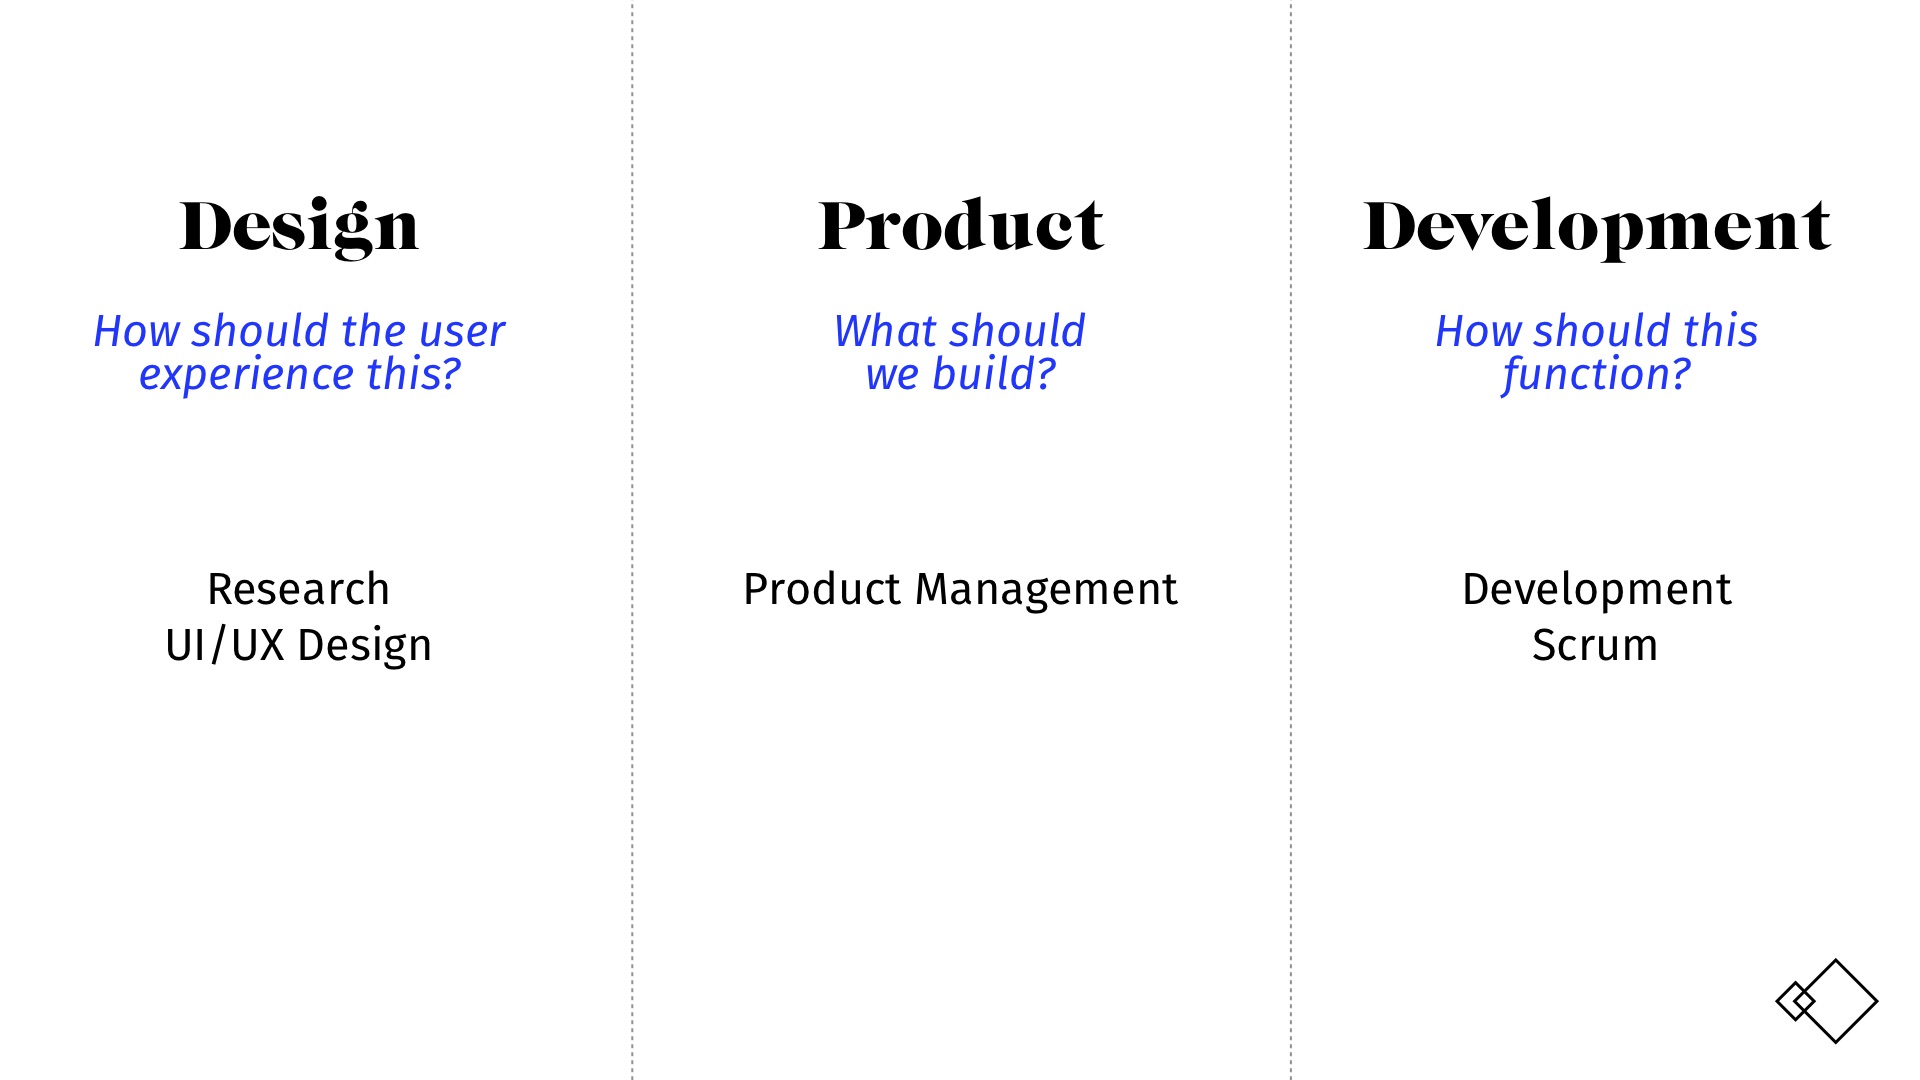 A presentation slide detailing the responsibilities of design, product and development teams